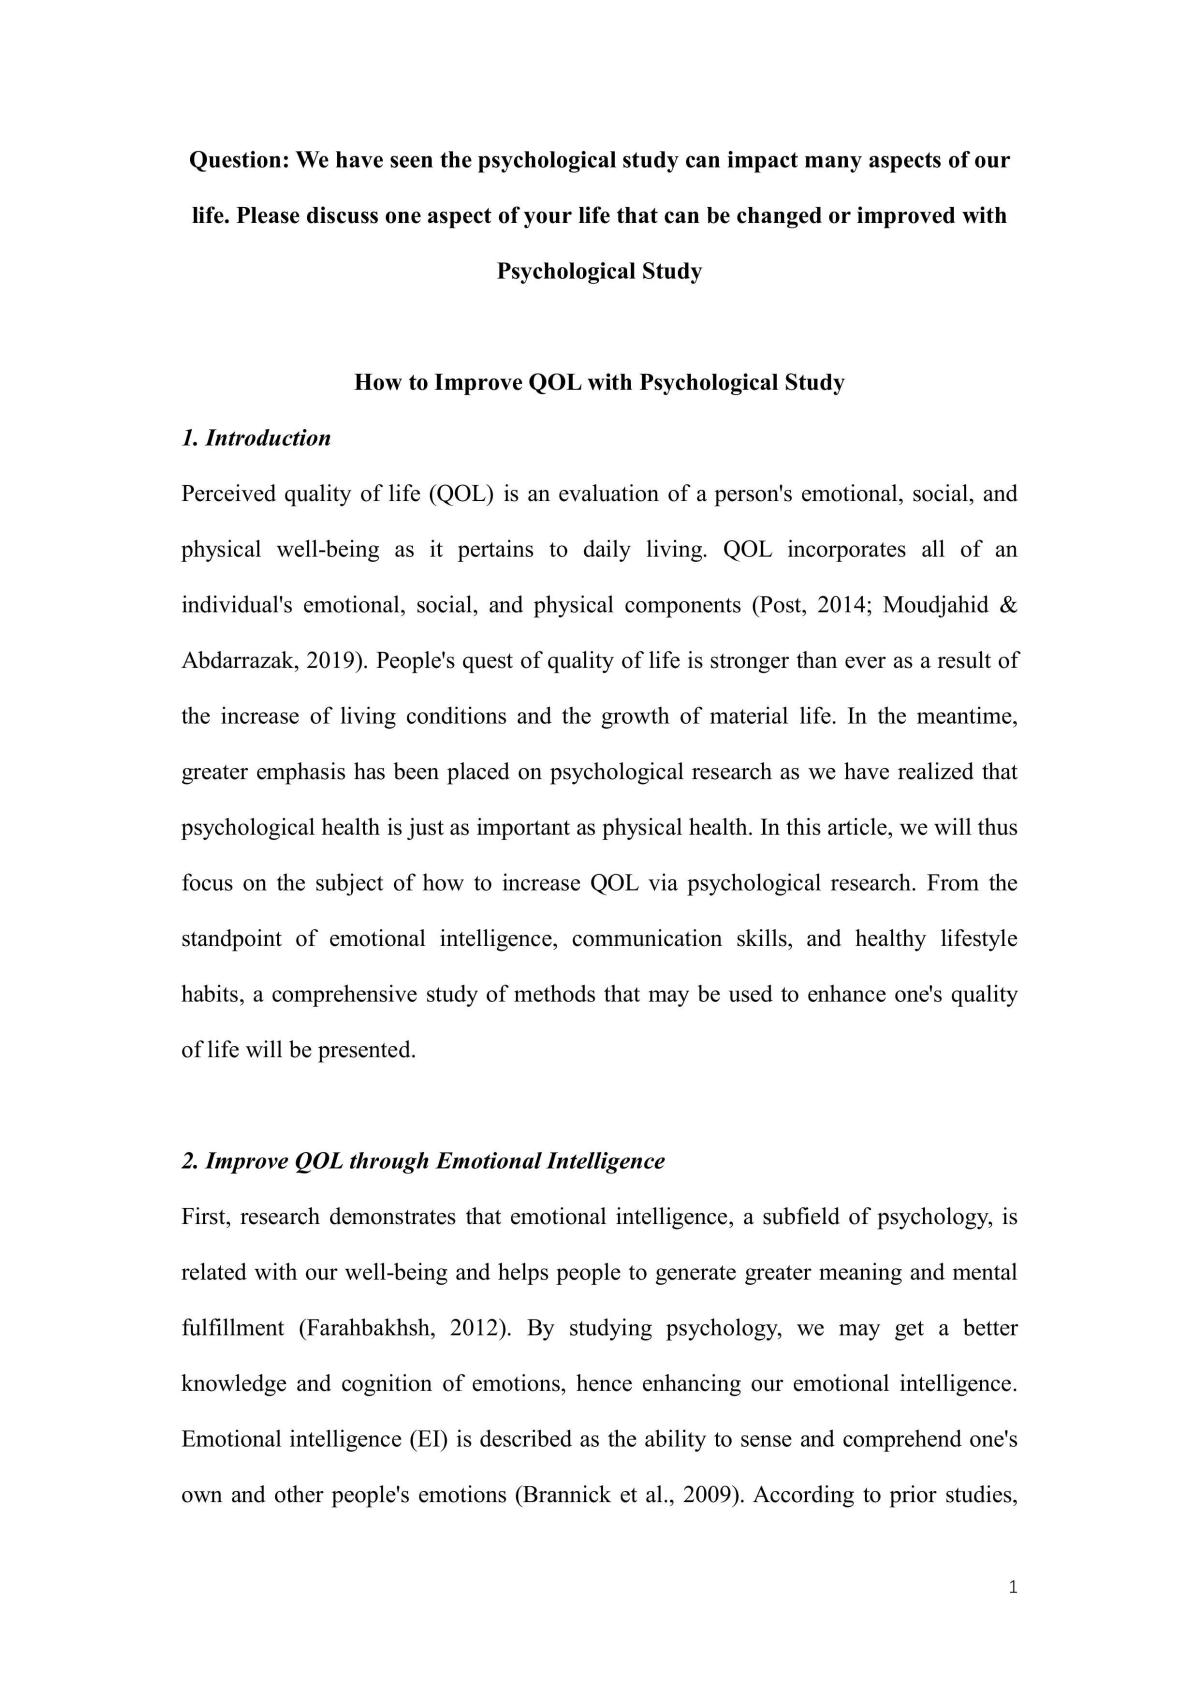 How to Improve QOL with Psychological Study - Page 1